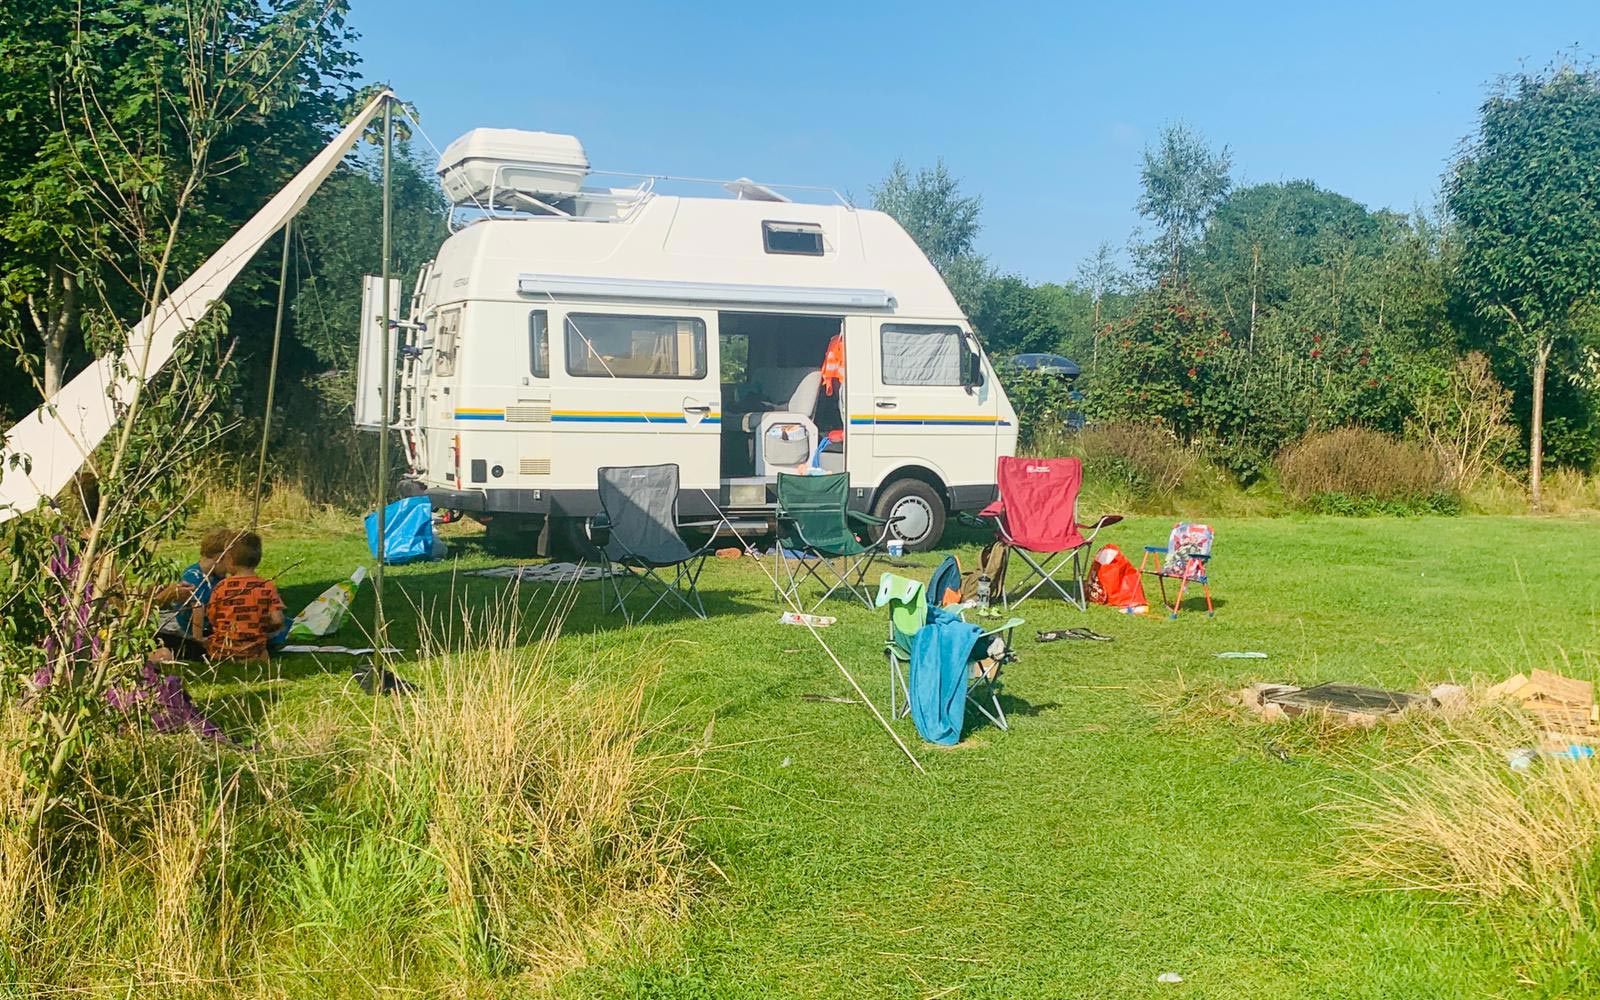 Campervan pitch at campsite Yorkshire and the hideaway Husthwaite. Book campervan sites York now.